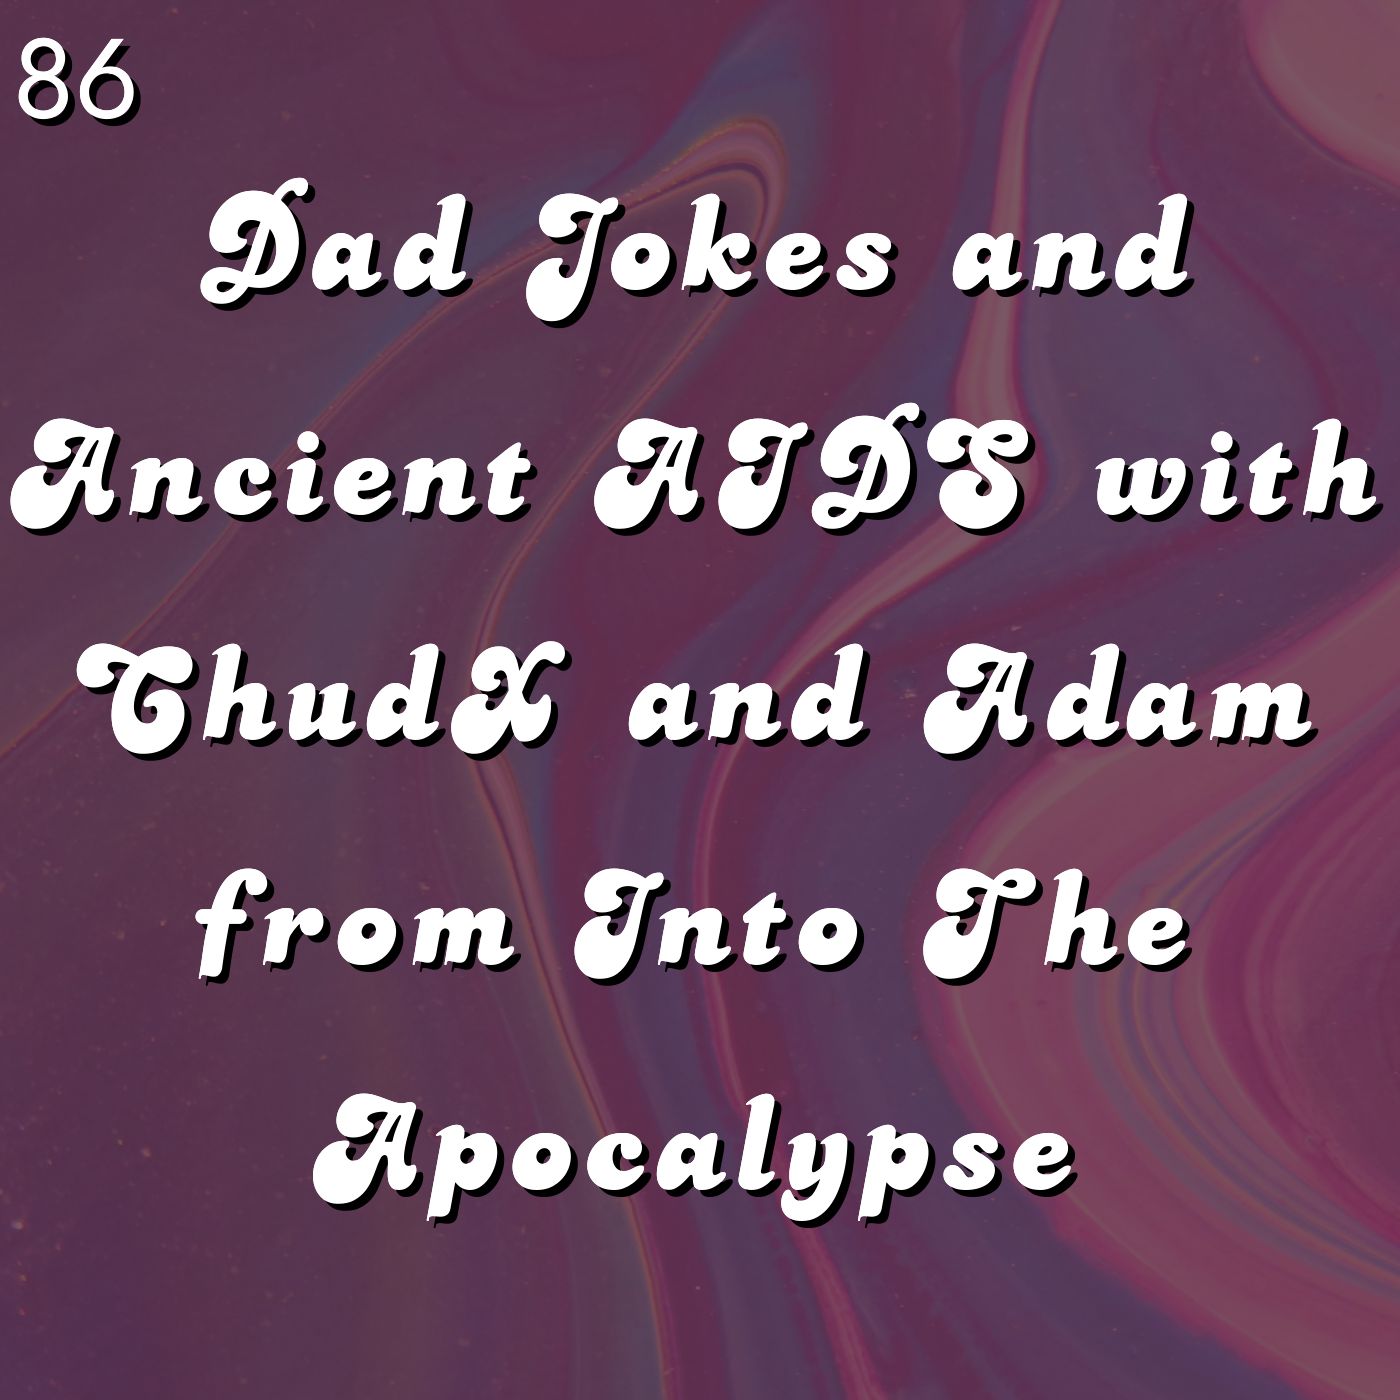 #86 - Dad Jokes and Ancient AIDS with ChudX and Adam from Into The Apocalypse